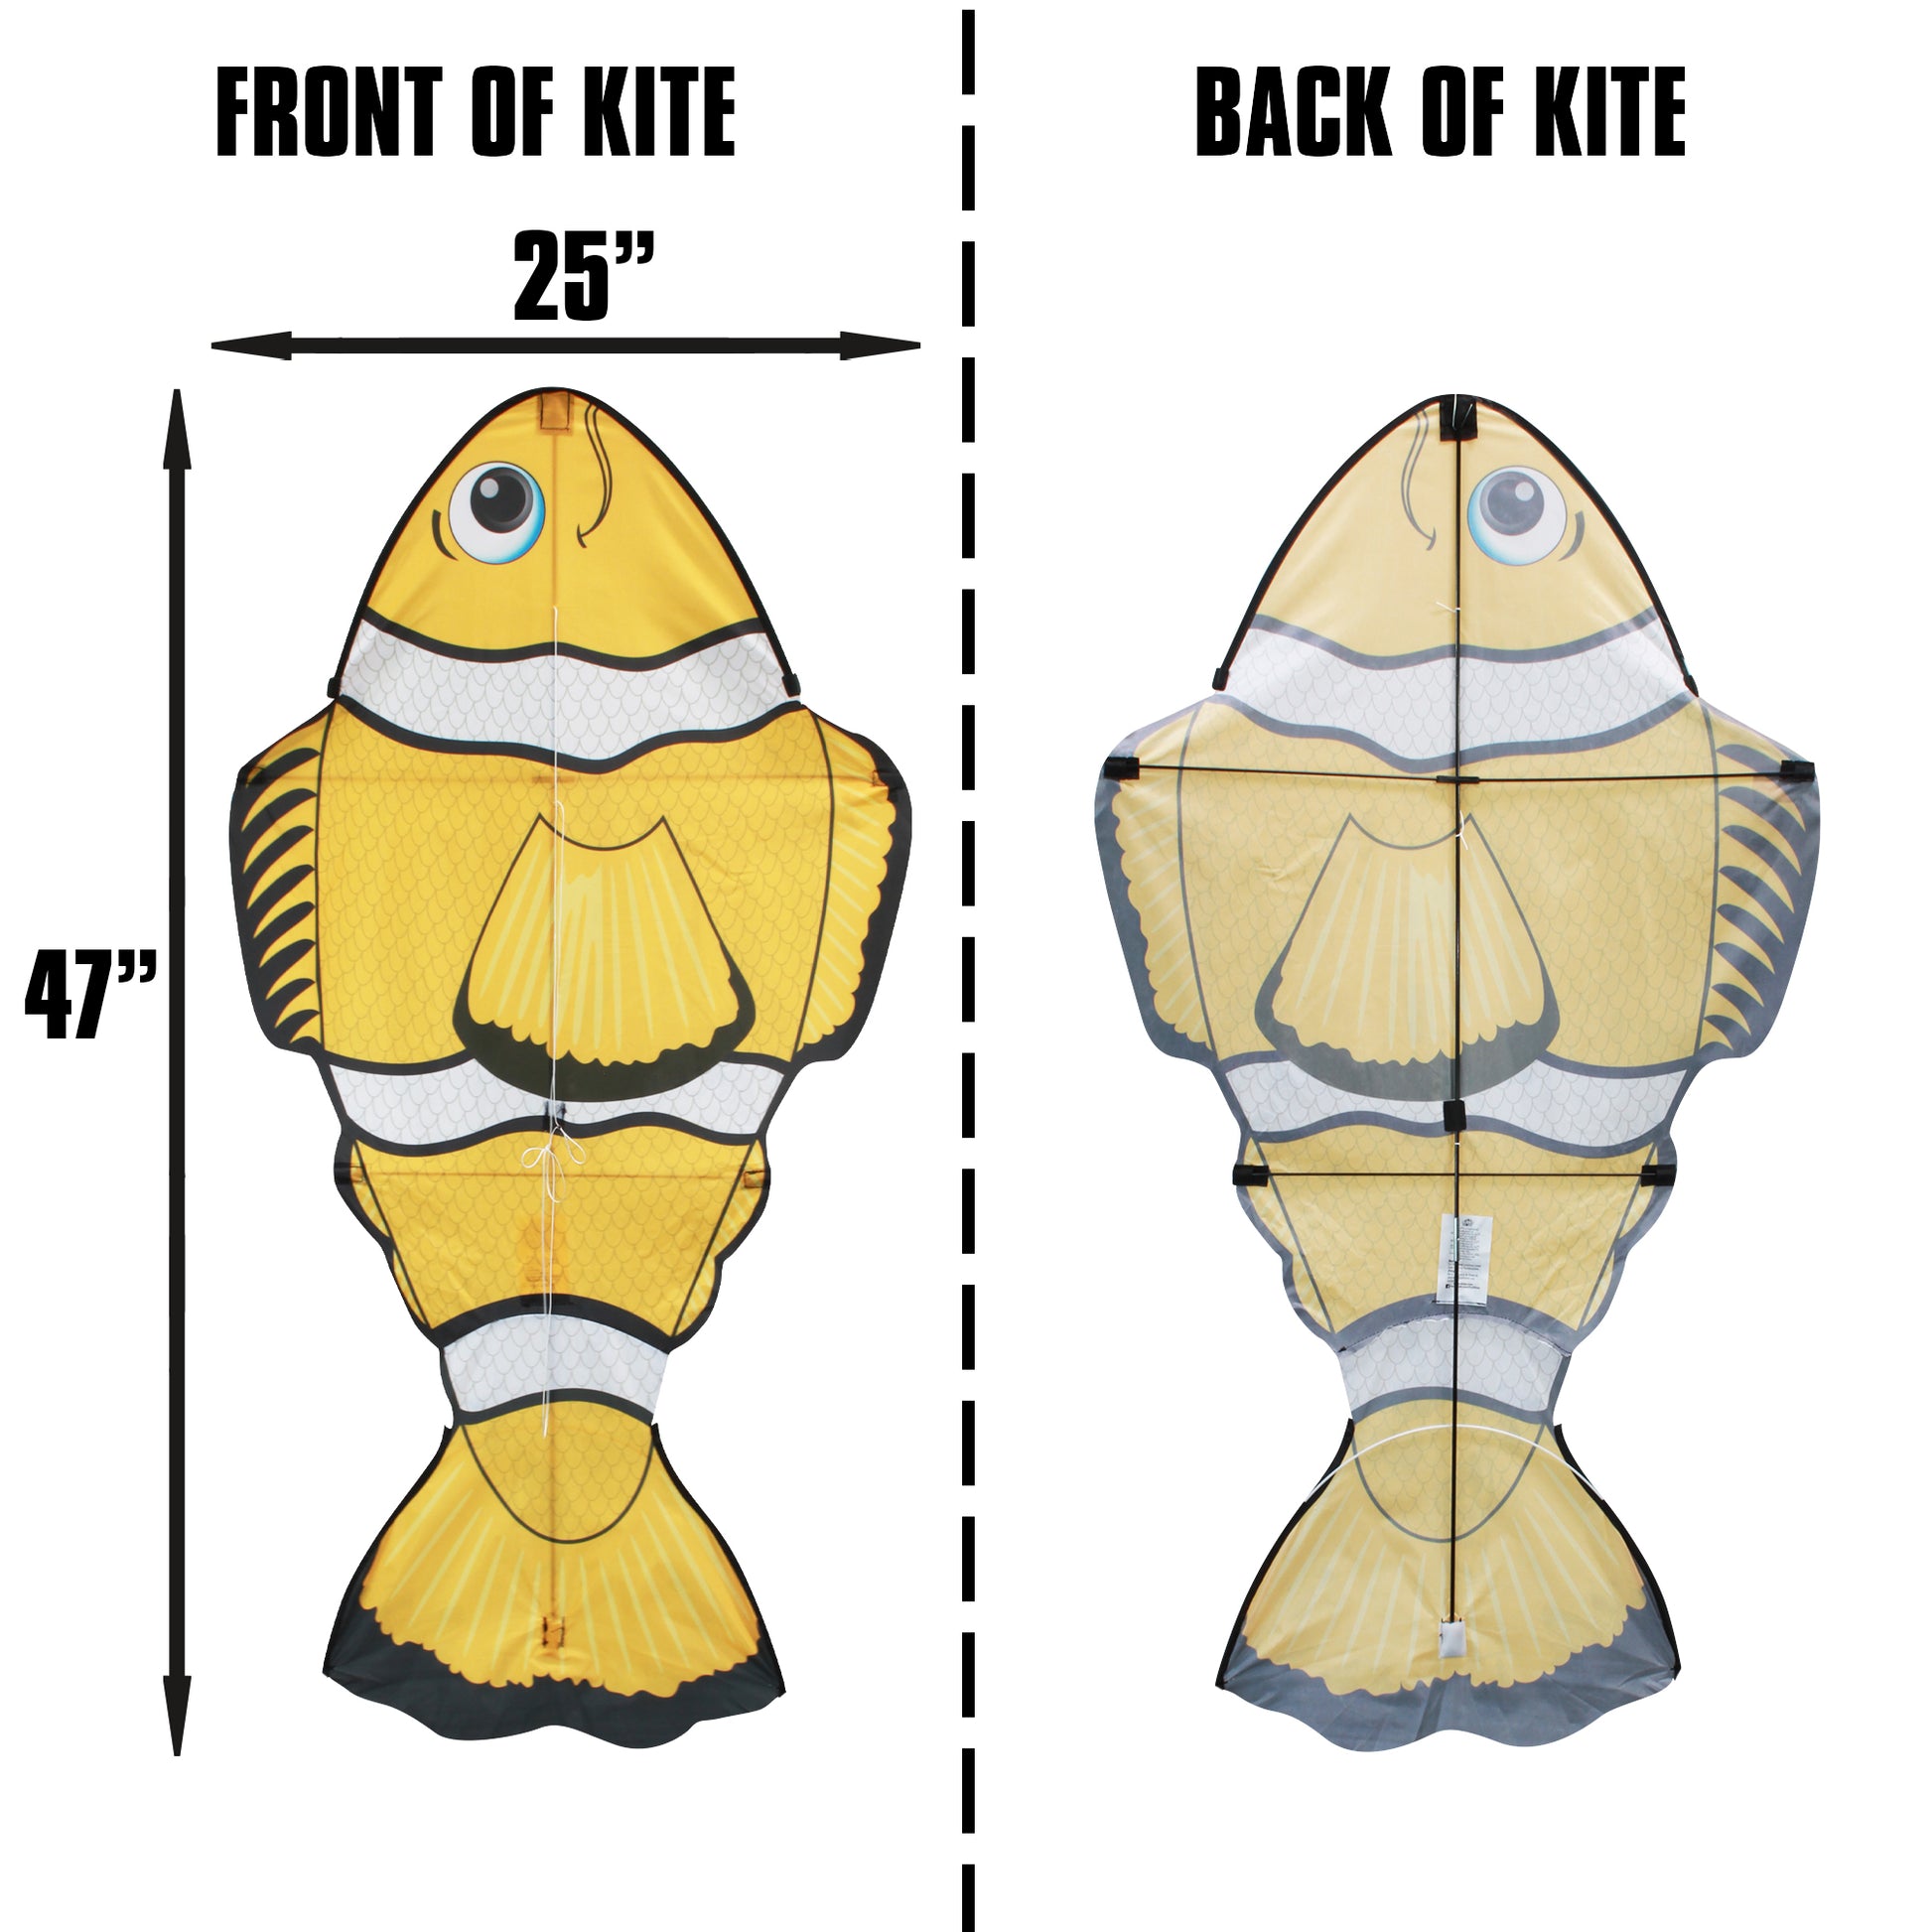 X Kites StratoKite ClownFish Nylon Figure Kite Product Dimensions 47 inches tall by 25 inches wide